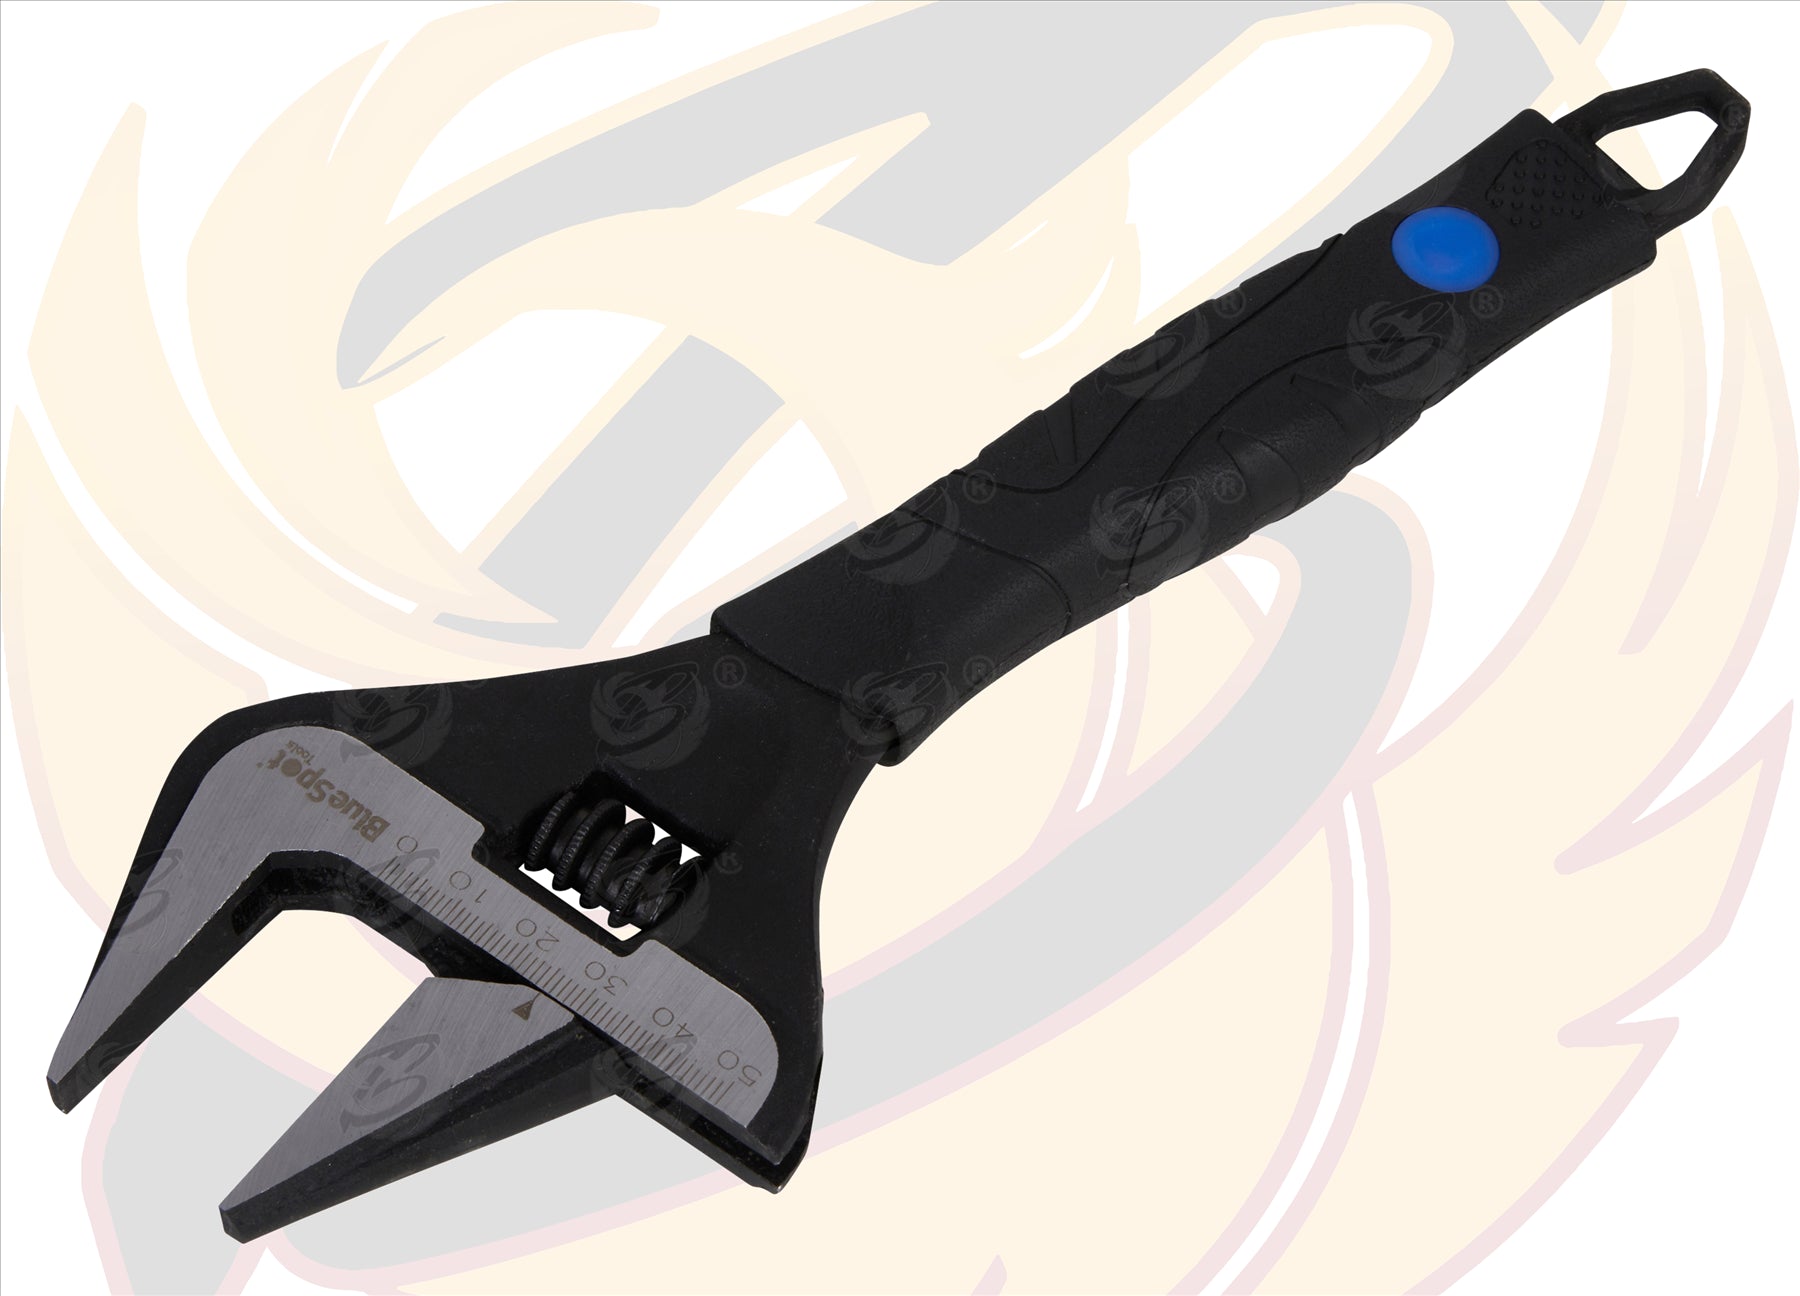 BLUESPOT 10" WIDE JAW ADJUSTABLE WRENCH ( 0 - 50mm )